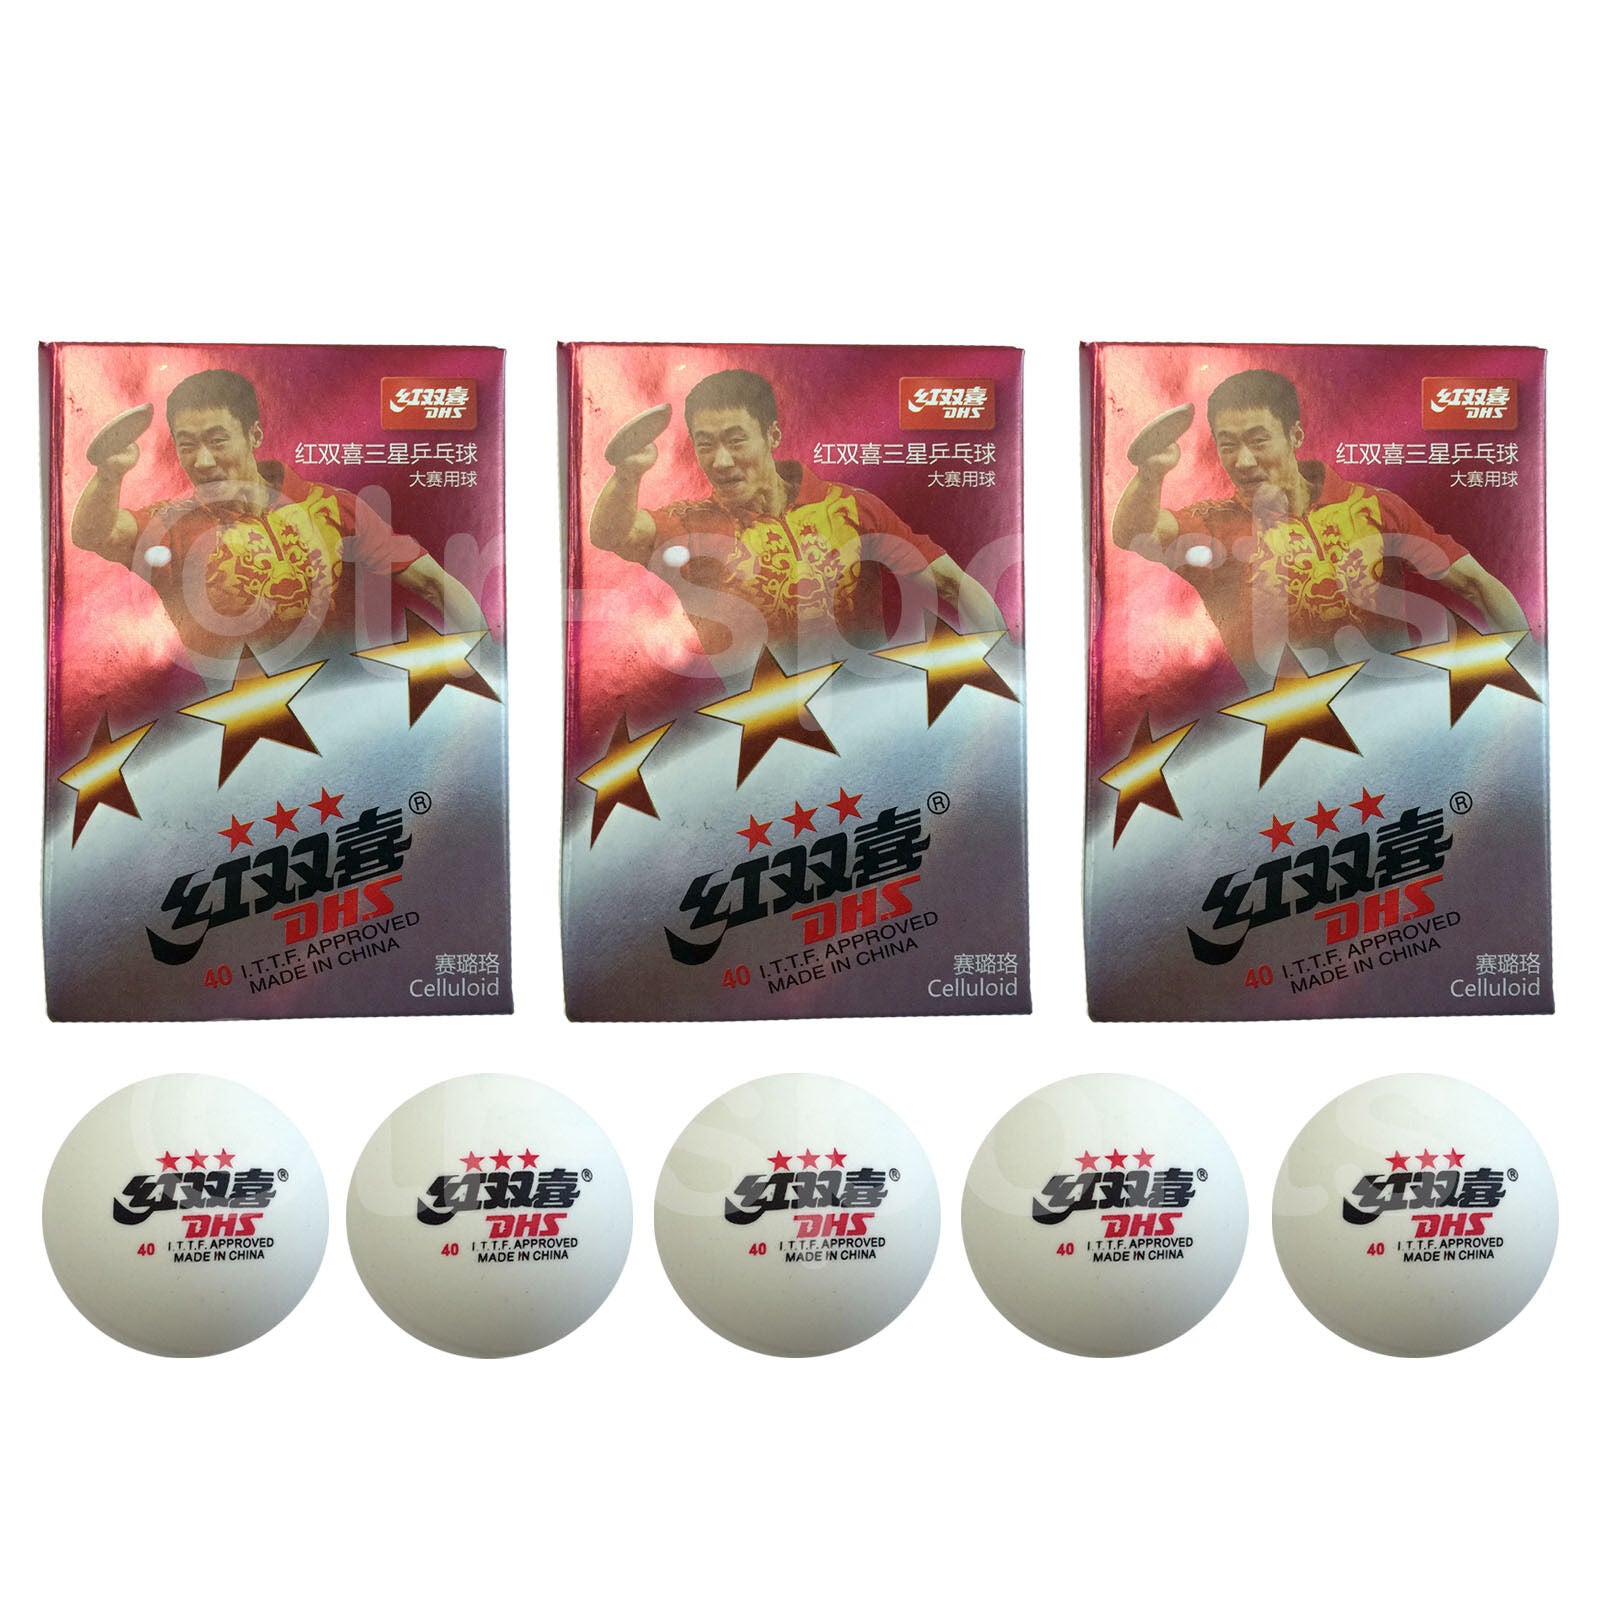 18x DHS 3 Star 40mm Table Tennis Ping Pong Competition Balls White